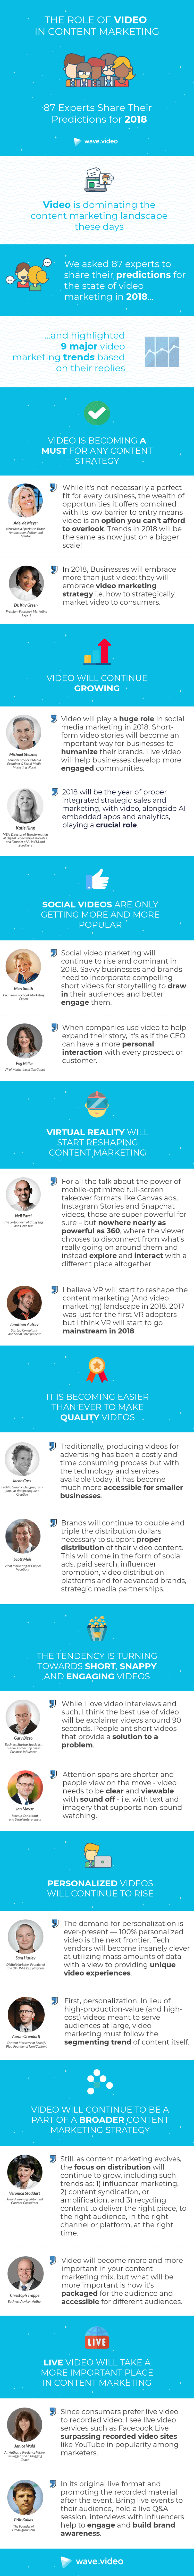 2018 Marketing Predictions From 87 Top Experts - #infographic